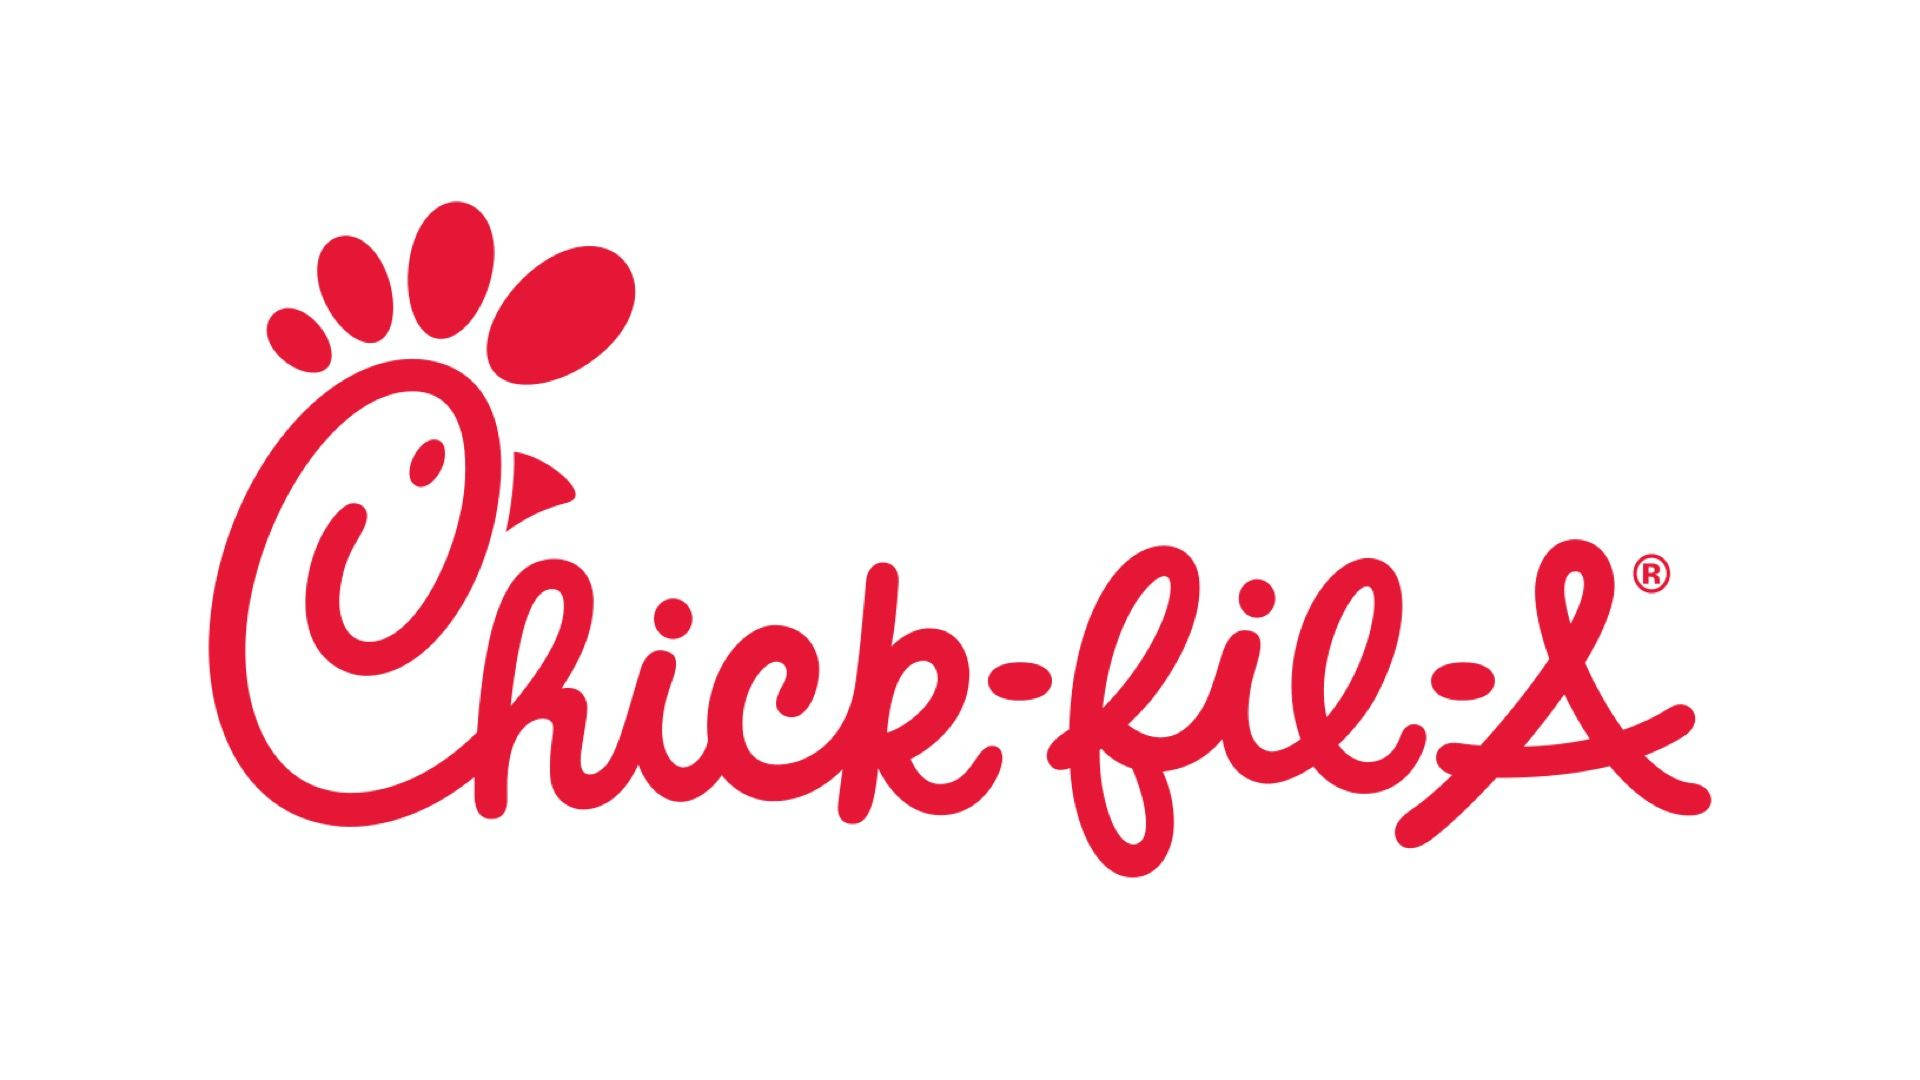 The Iconic Chick-fil-a Logo